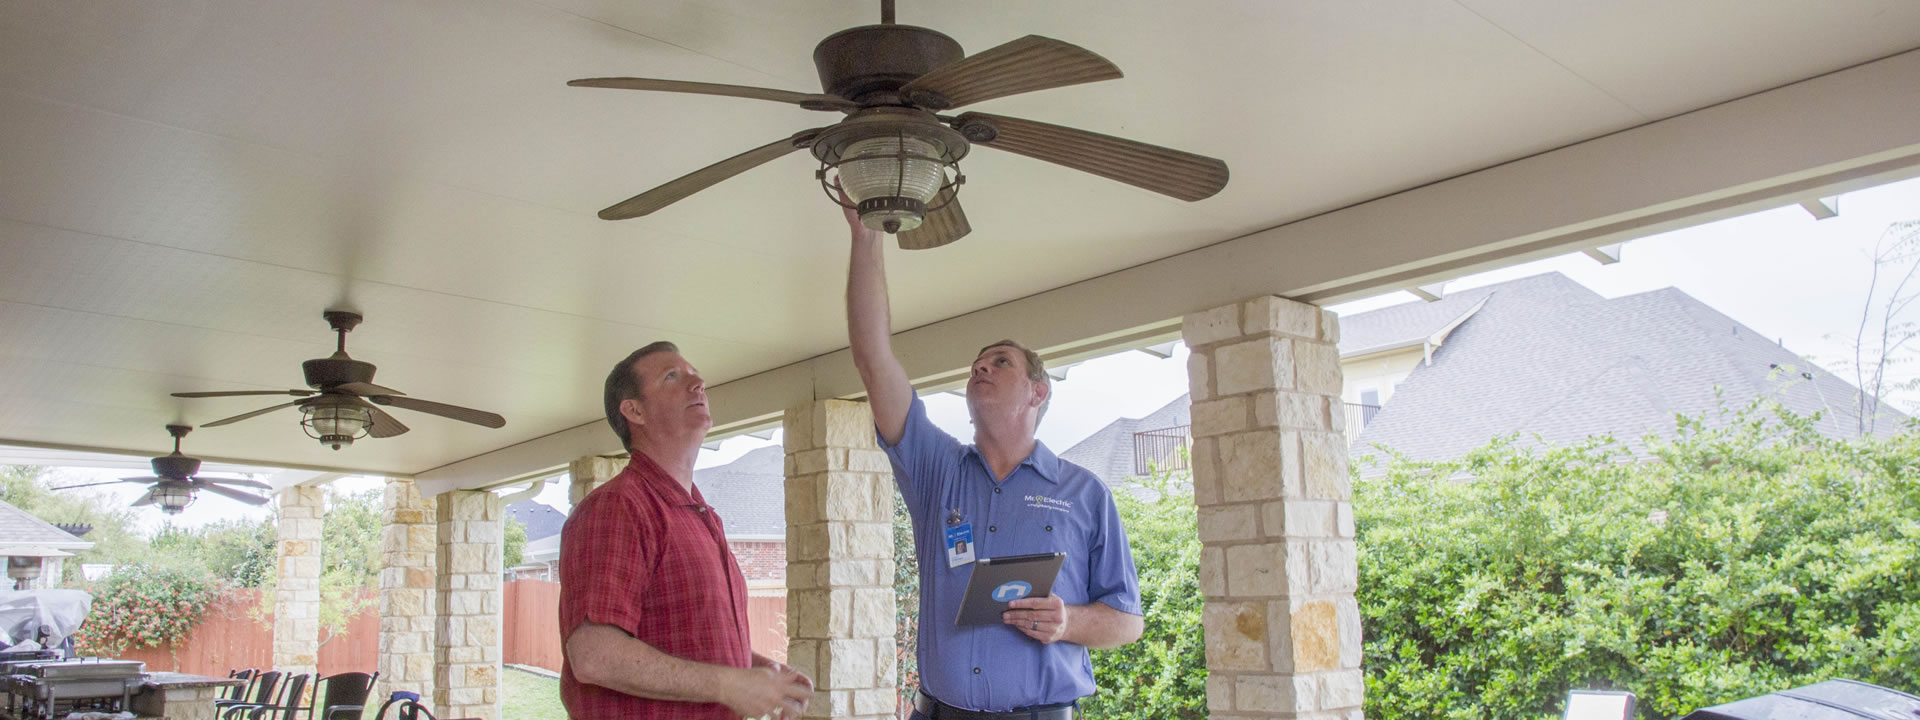 Ceiling Fan Installation in Tomball